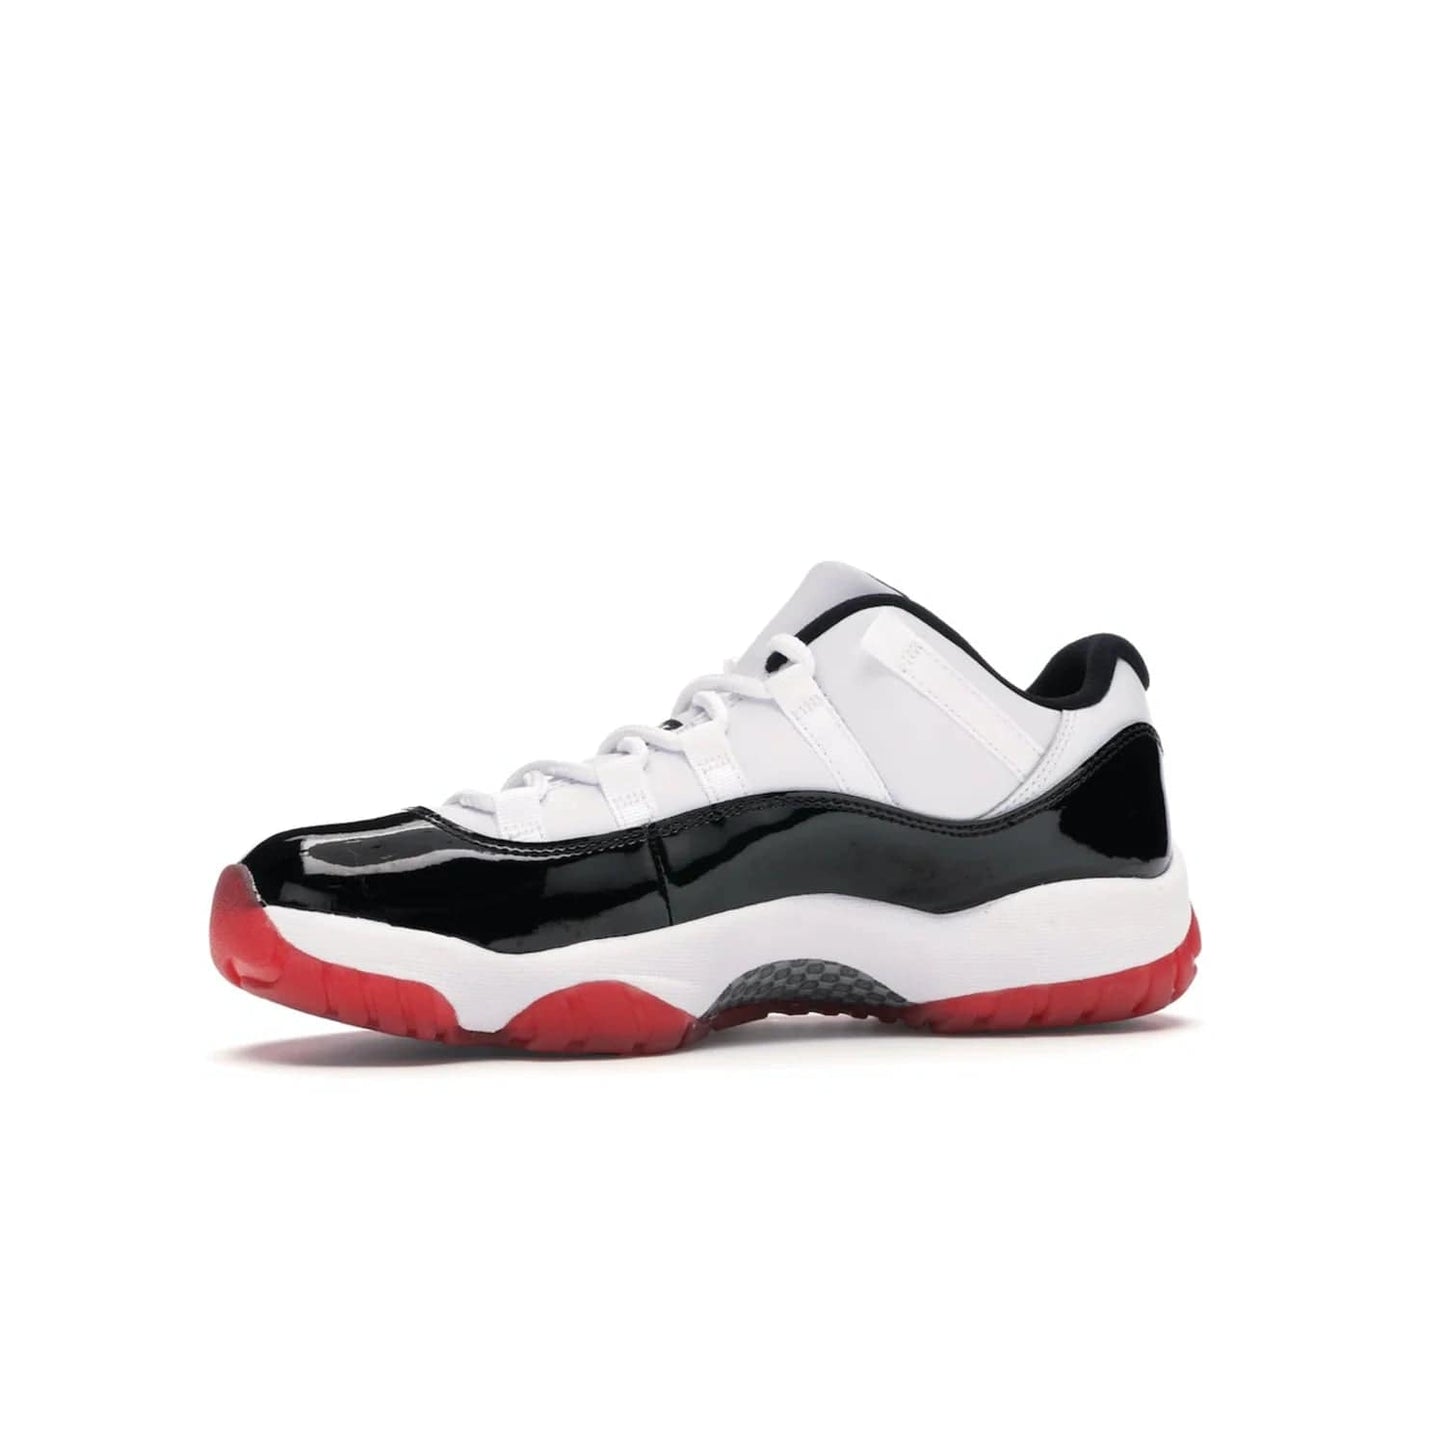 Jordan 11 Retro Low Concord Bred - Image 17 - Only at www.BallersClubKickz.com - Grab the classic Jordan 11 look with the Jordan 11 Retro Low Concord Bred. With white and black elements and the iconic red outsole of the Jordan 11 Bred, you won't miss a beat. Released in June 2020, the perfect complement to any outfit.